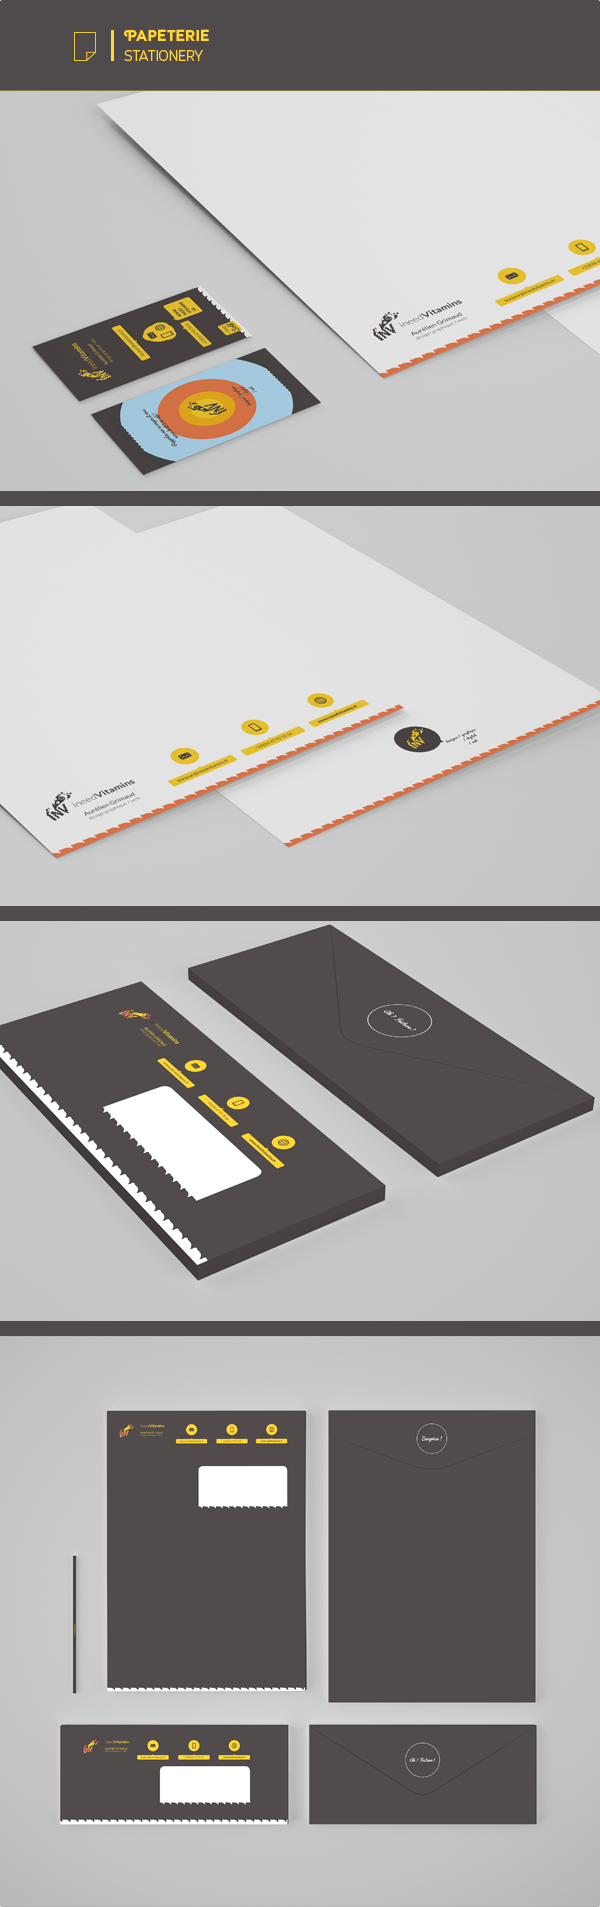 Logotype visual assets pictograms icons motion graphic color scheme typefaces ineedvitamins.fr selfbranding